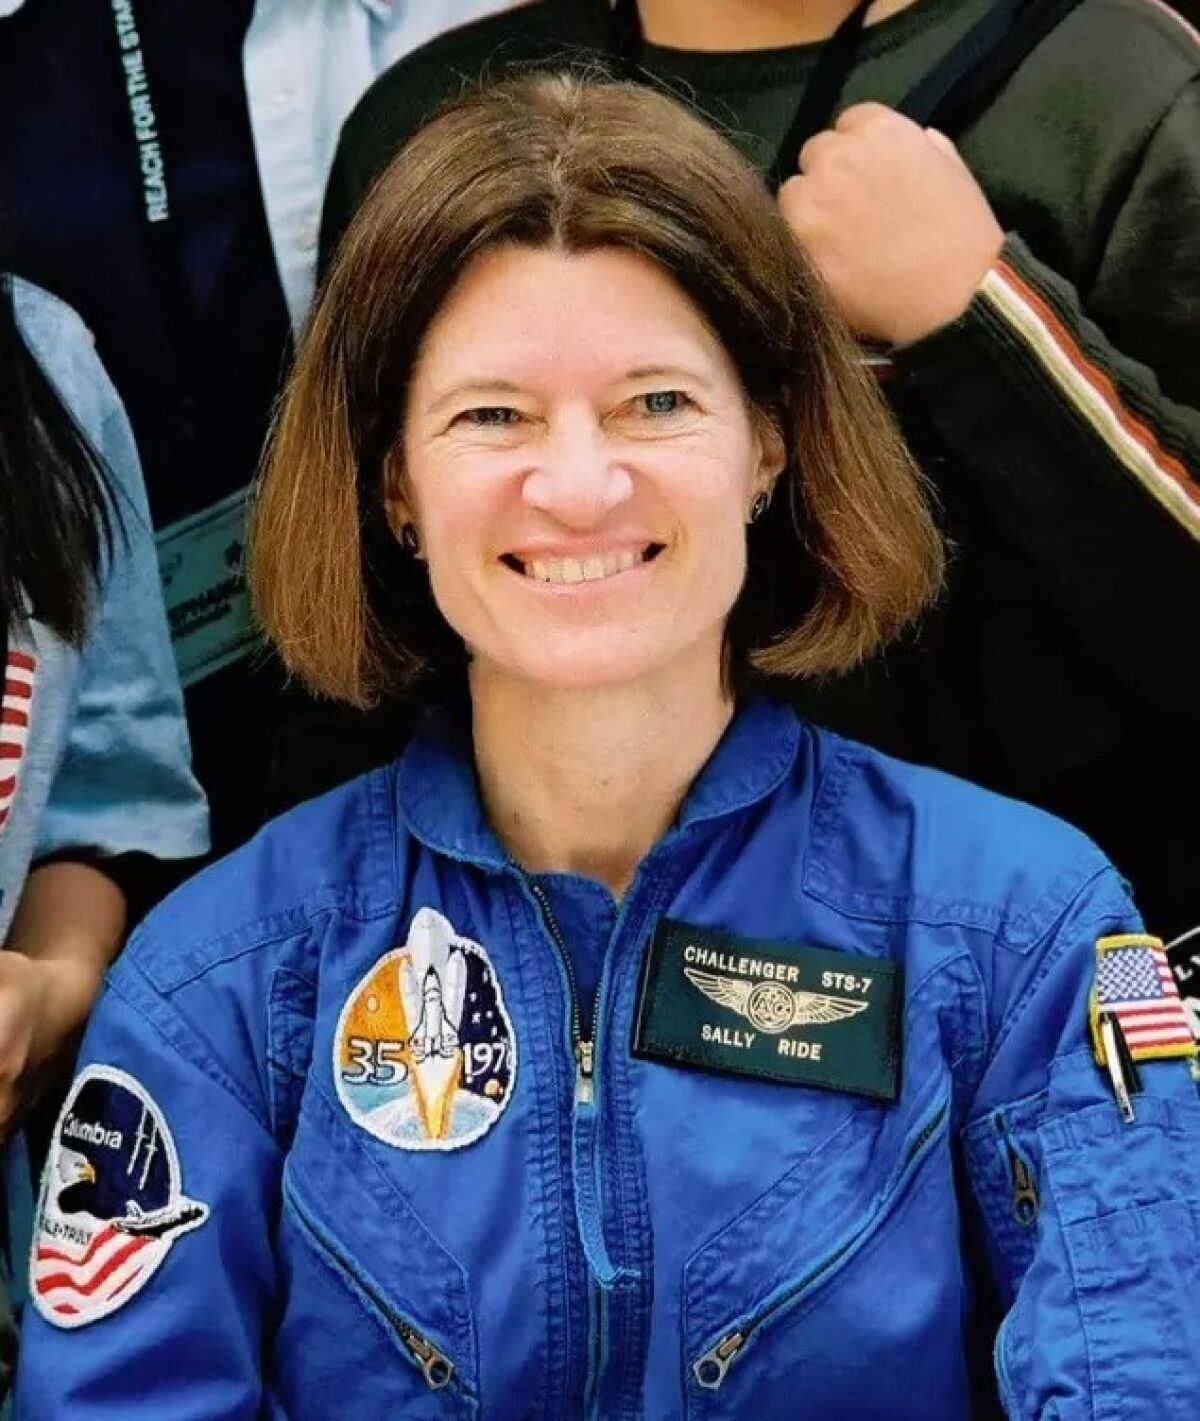 The late Sally Ride will be honored with a portion of Highway 101 in the west San Fernando Valley being named after her.